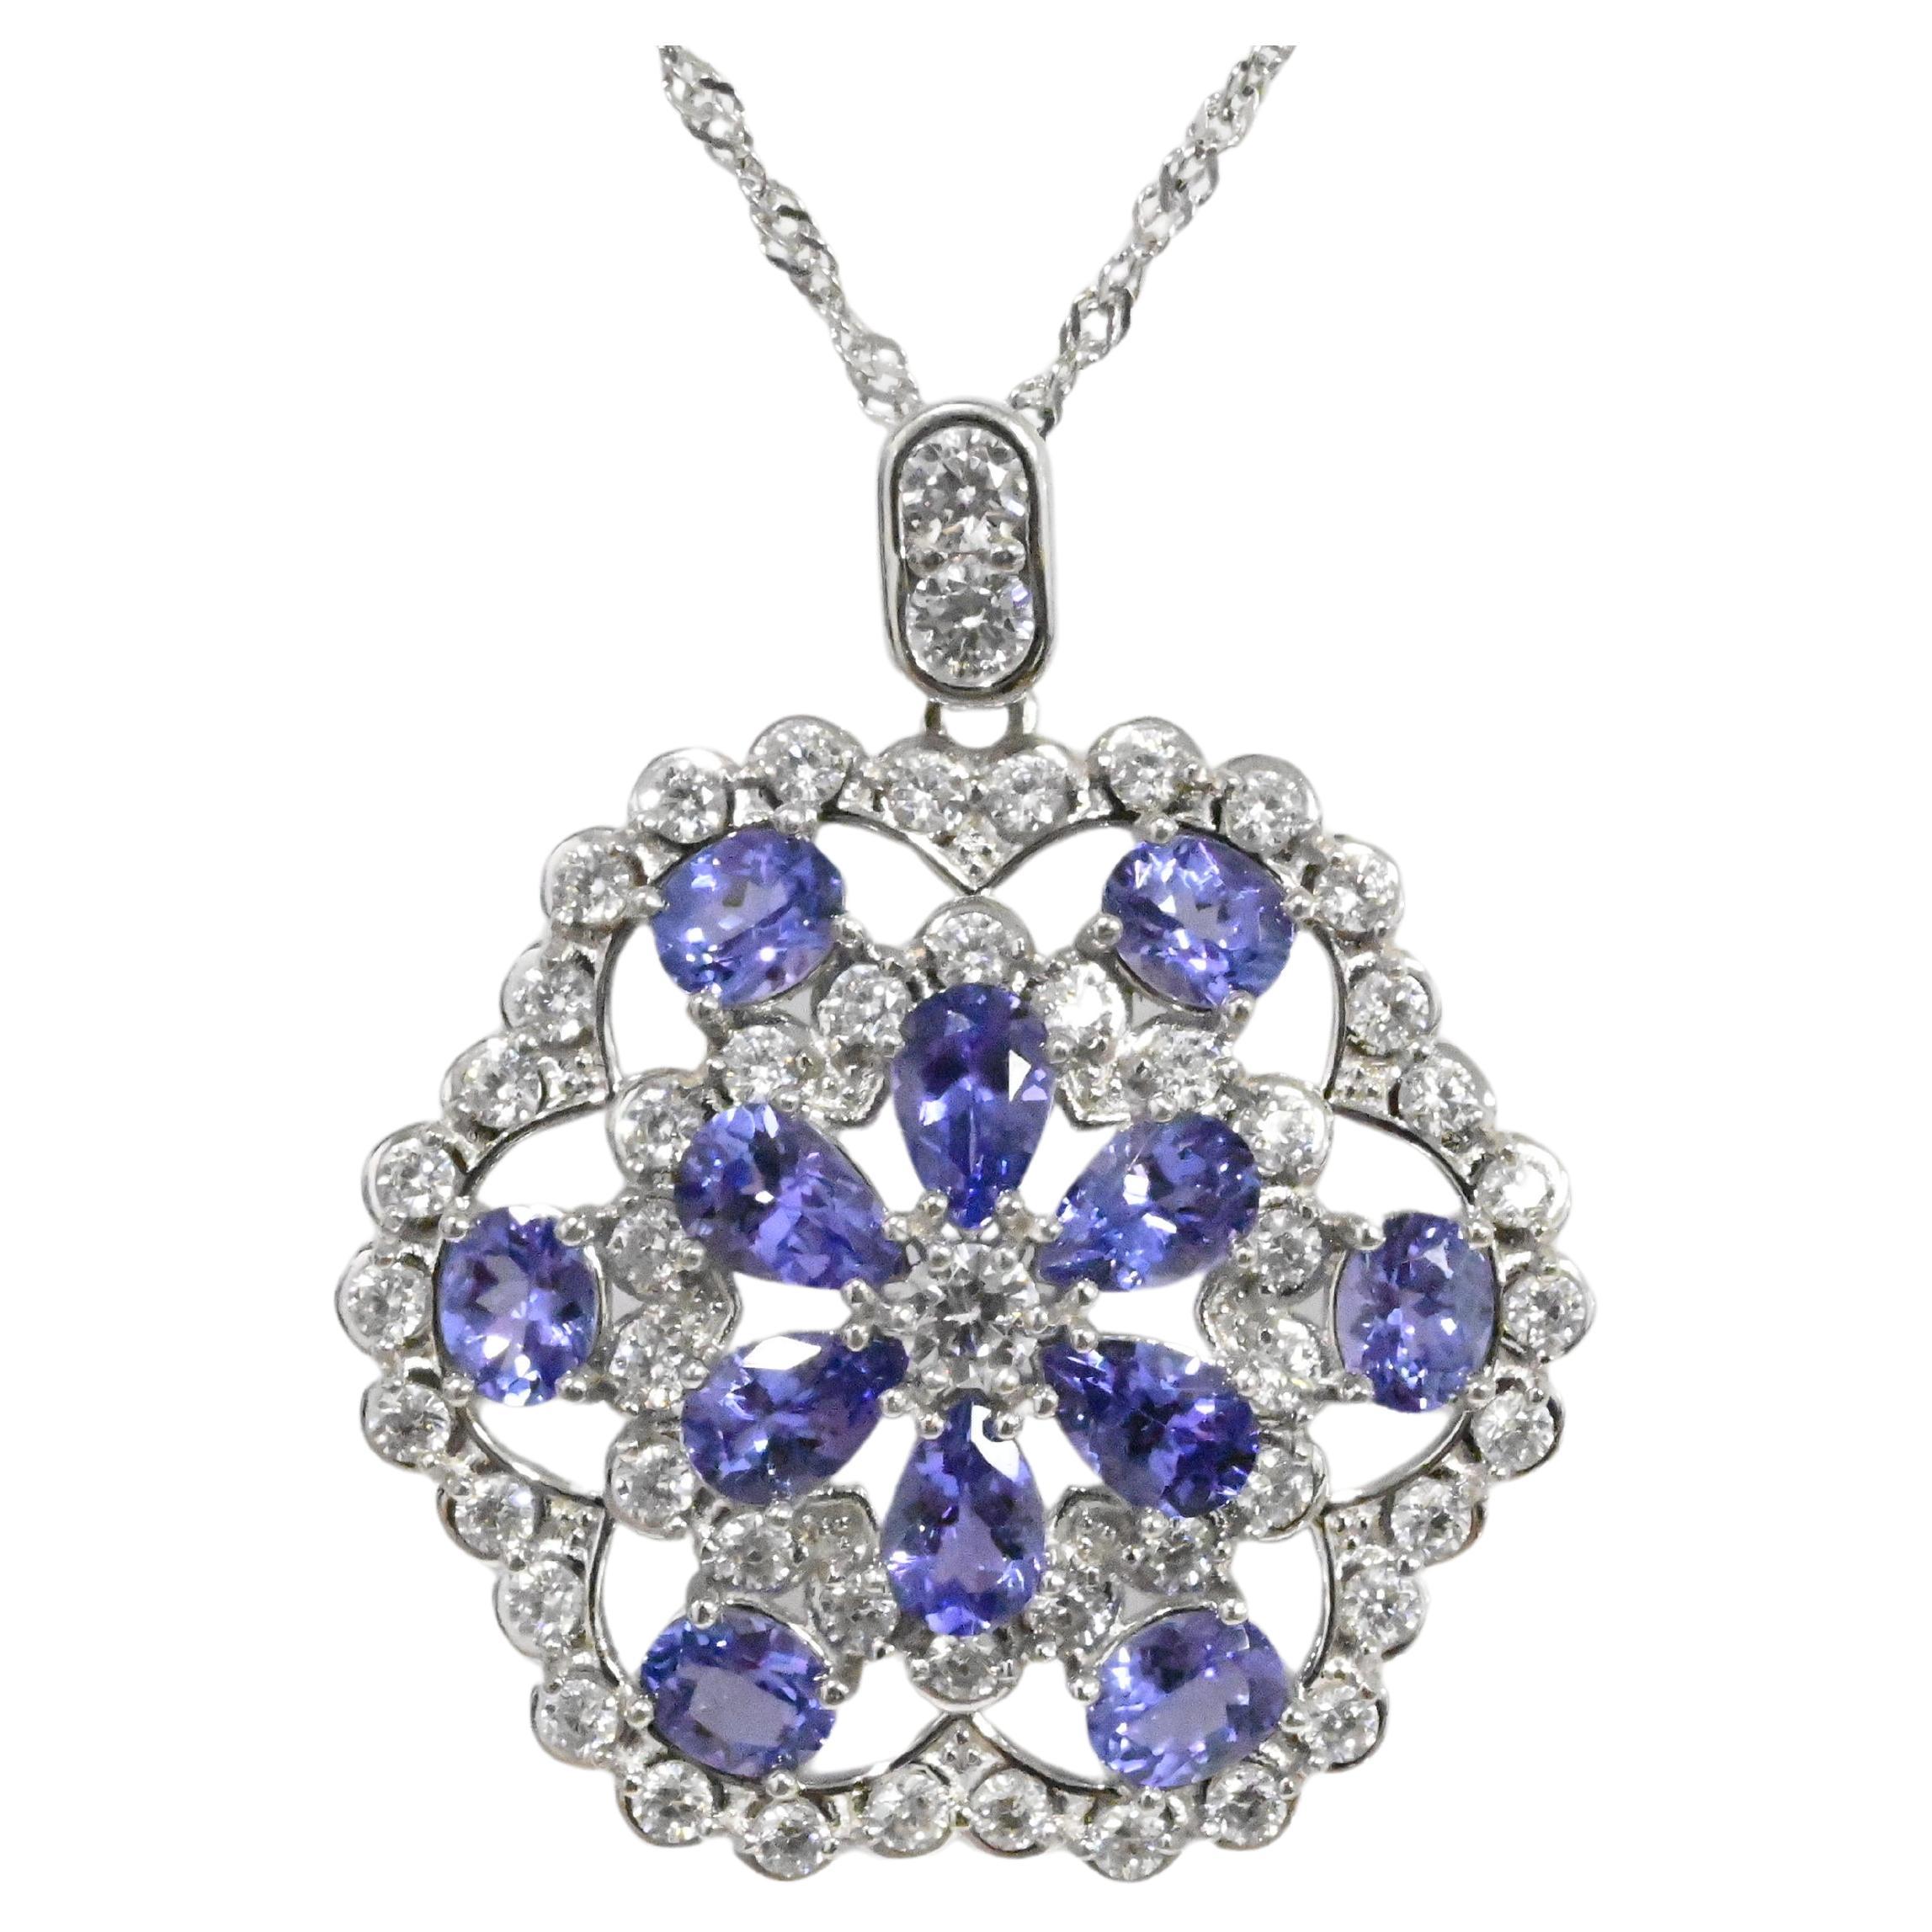 Tanzanite 925 Sterling Sliver Rhodium  Metal Platted Women's Pendant 2.88cts
Primary Stone: Tanzanite 
Stone Shape:6 x 4mm Pear
Stone Weight :2.84cts
Metal Weight :4.84g

Secondary Stone :White CZ
No of Stone :6  pieces
Other Stone: White CZ
No of